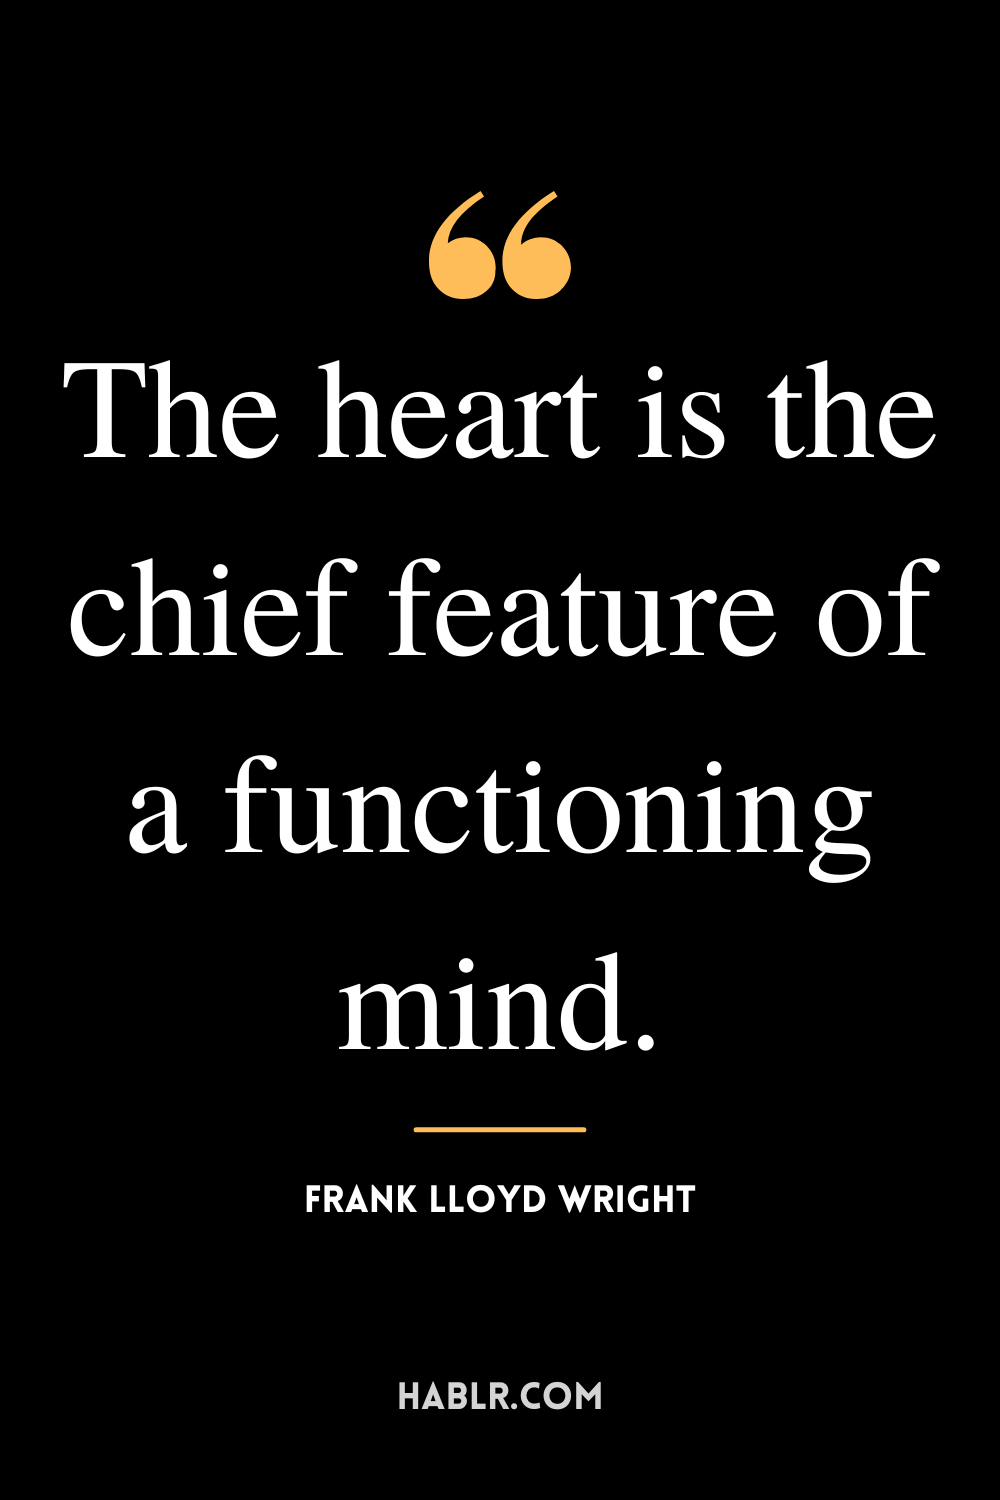 ‘‘The heart is the chief feature of a functioning mind.” -Frank Lloyd Wright